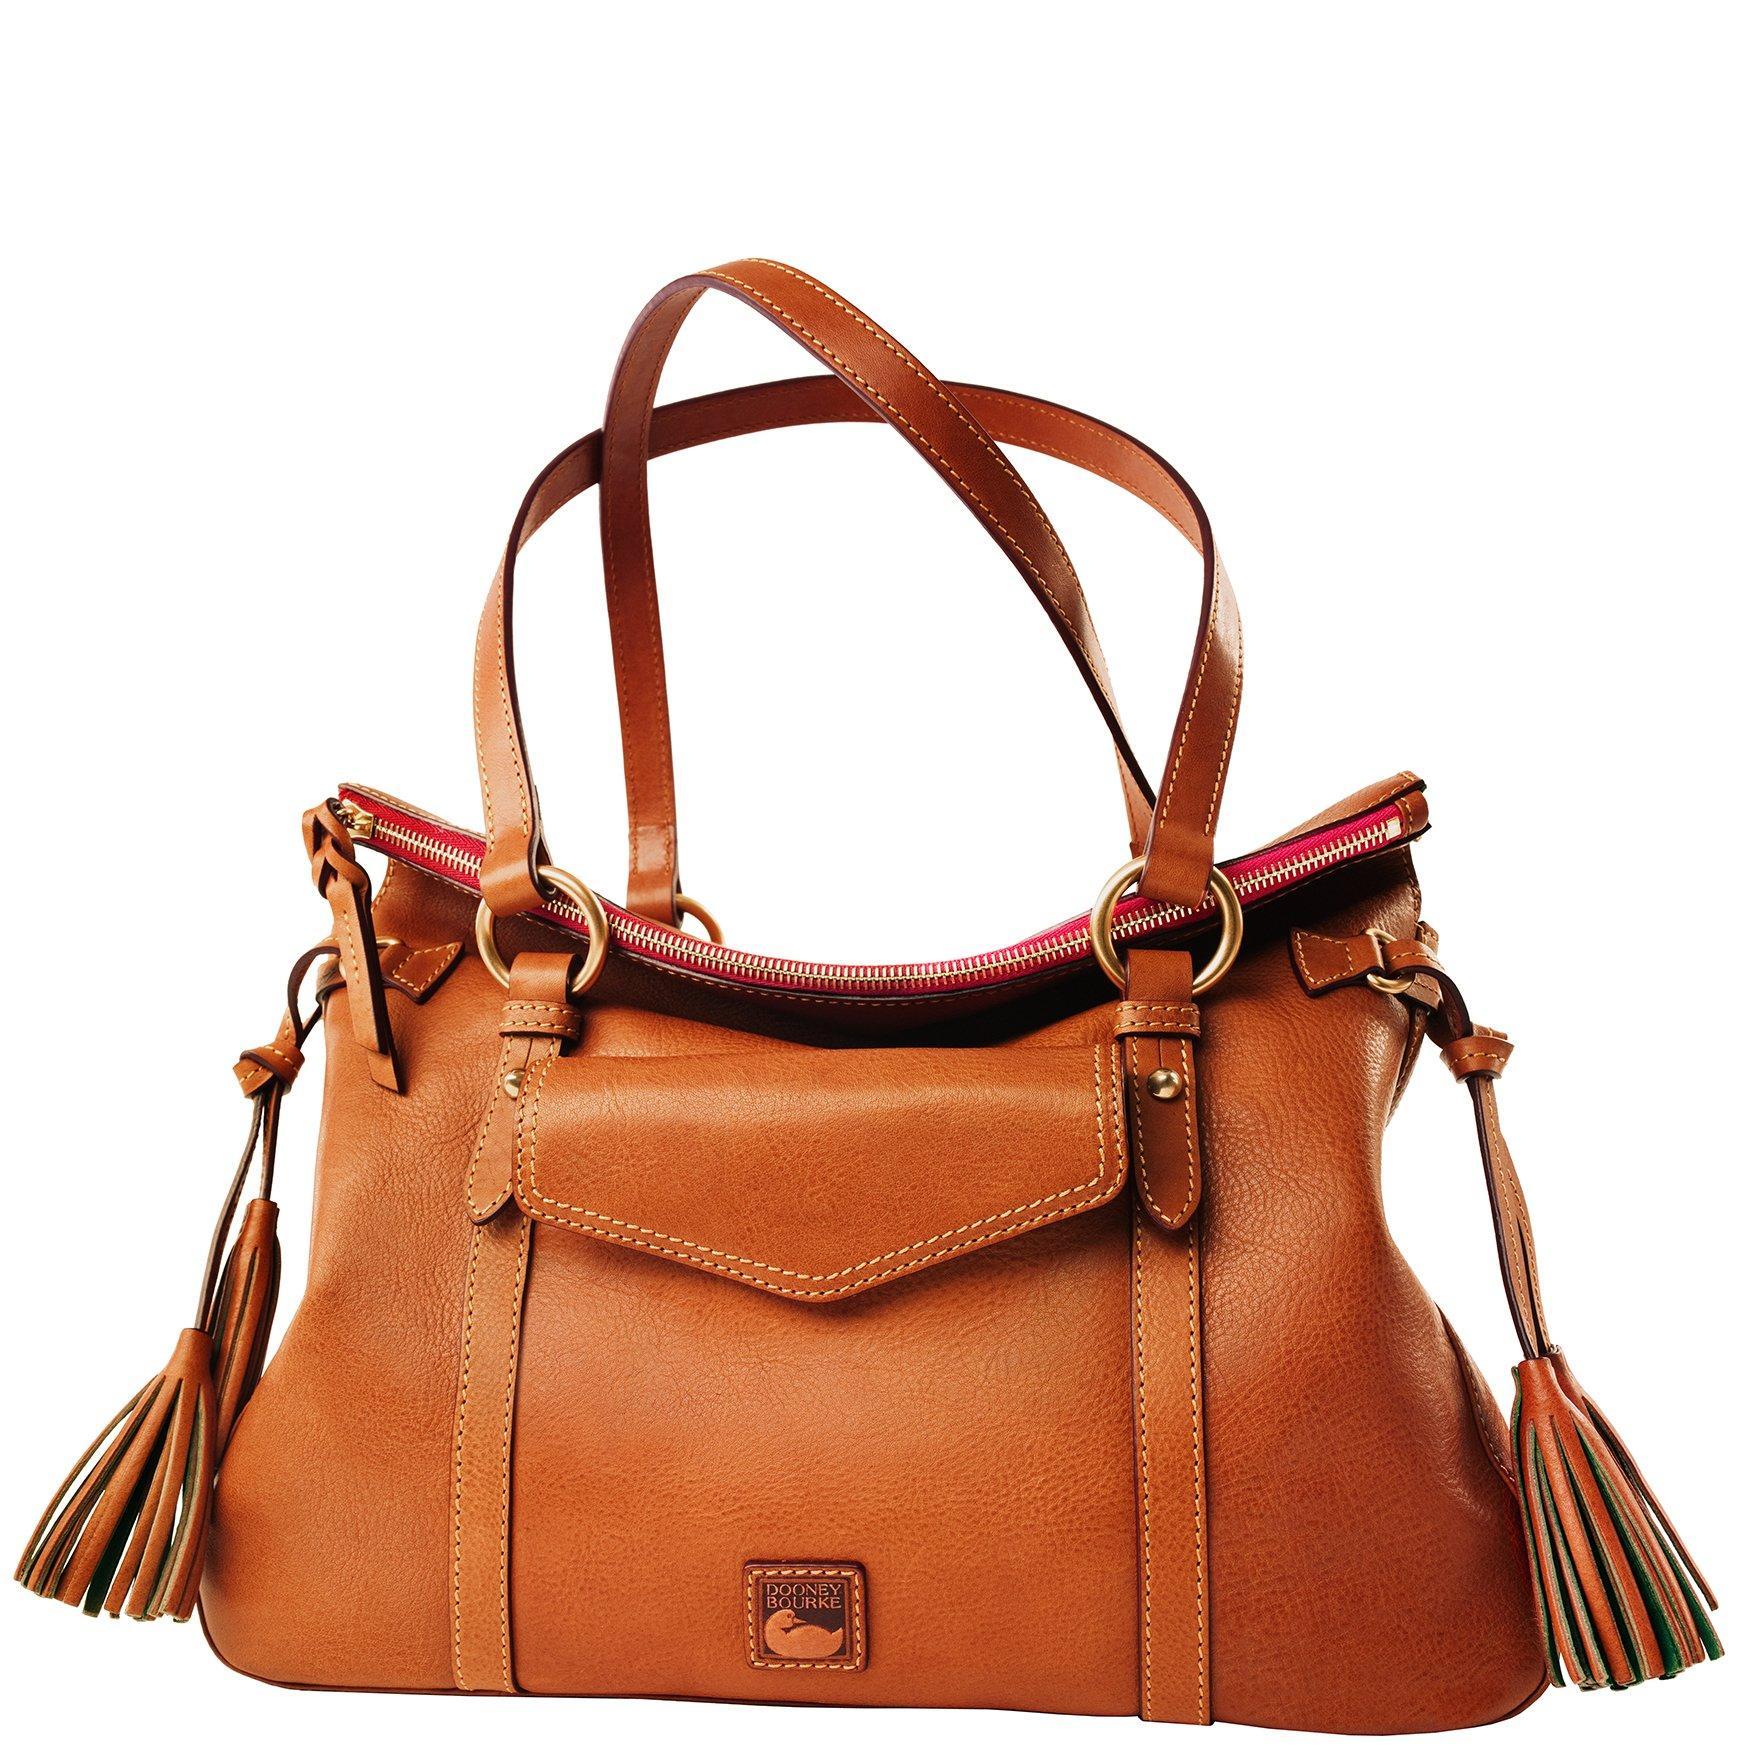 Dooney & Bourke Leather Florentine The Smith Bag in Natural - Lyst